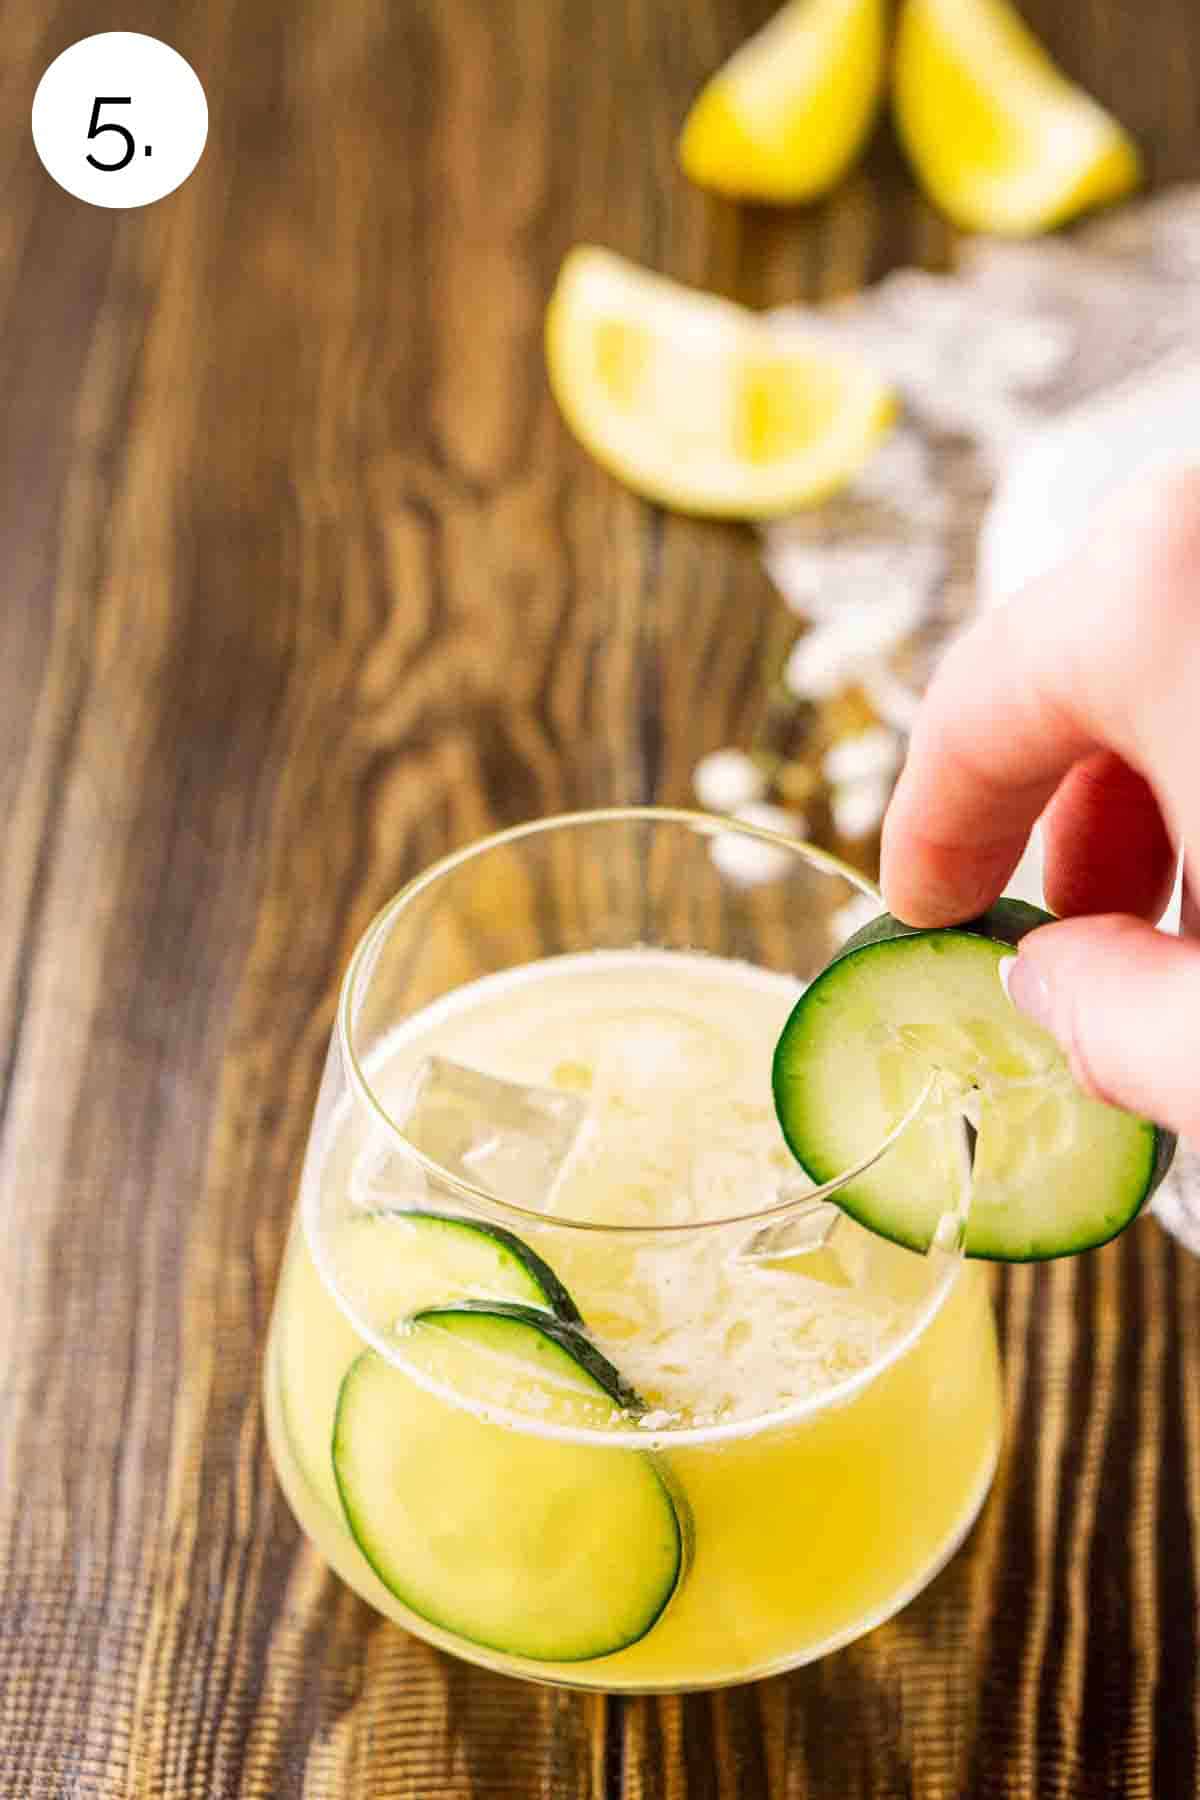 A hand placing a cucumber slice on the rim of the serving glass on a brown wooden surface.